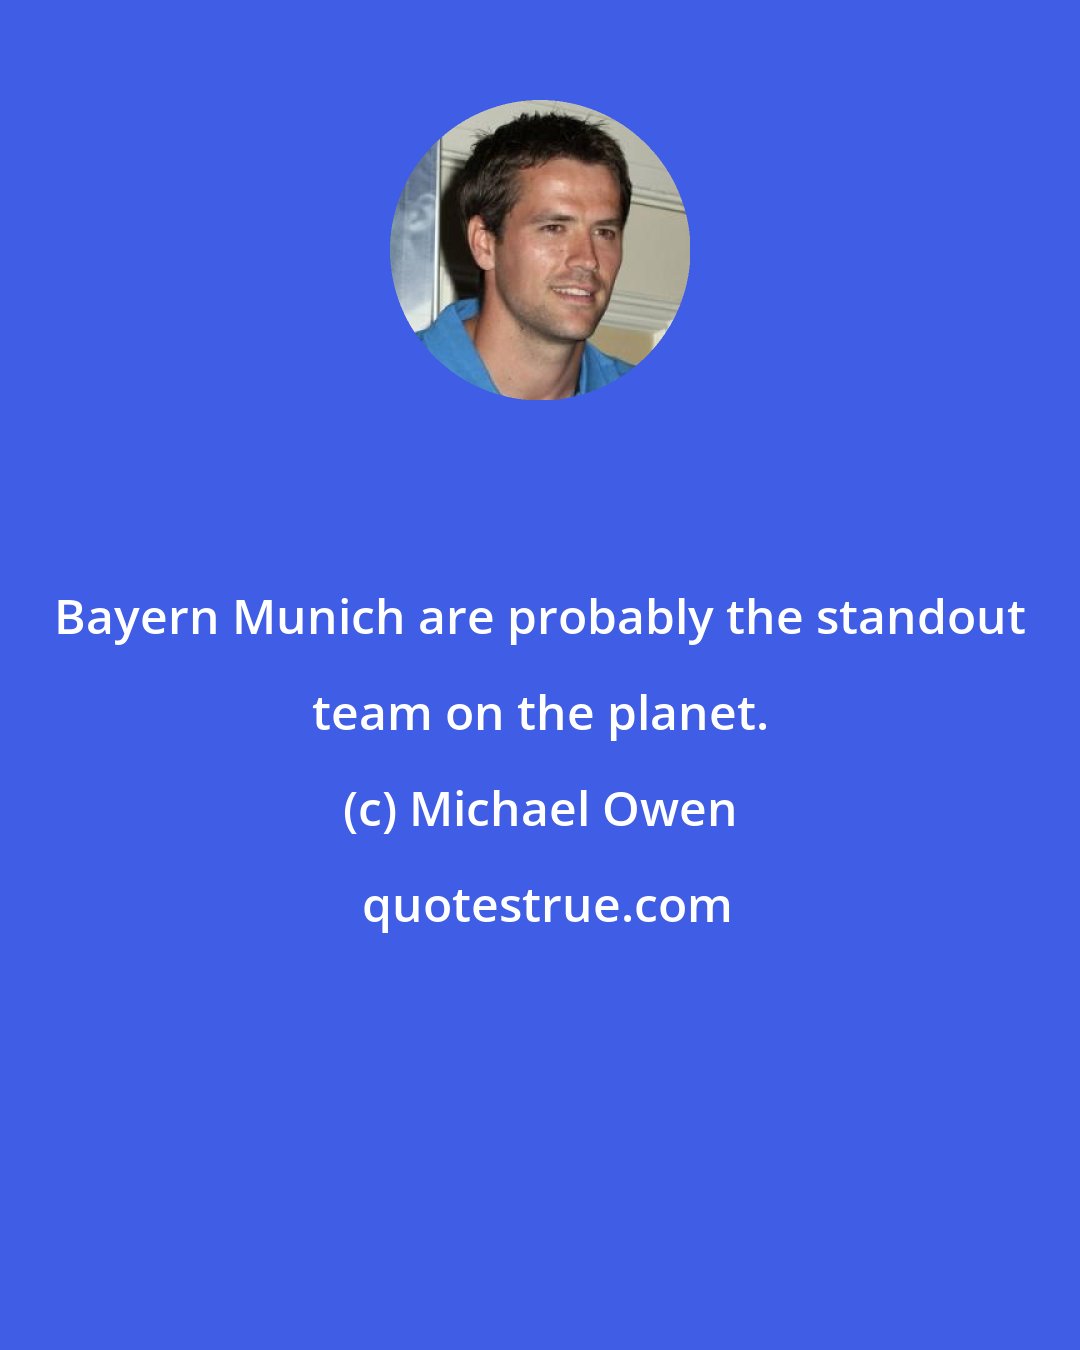 Michael Owen: Bayern Munich are probably the standout team on the planet.